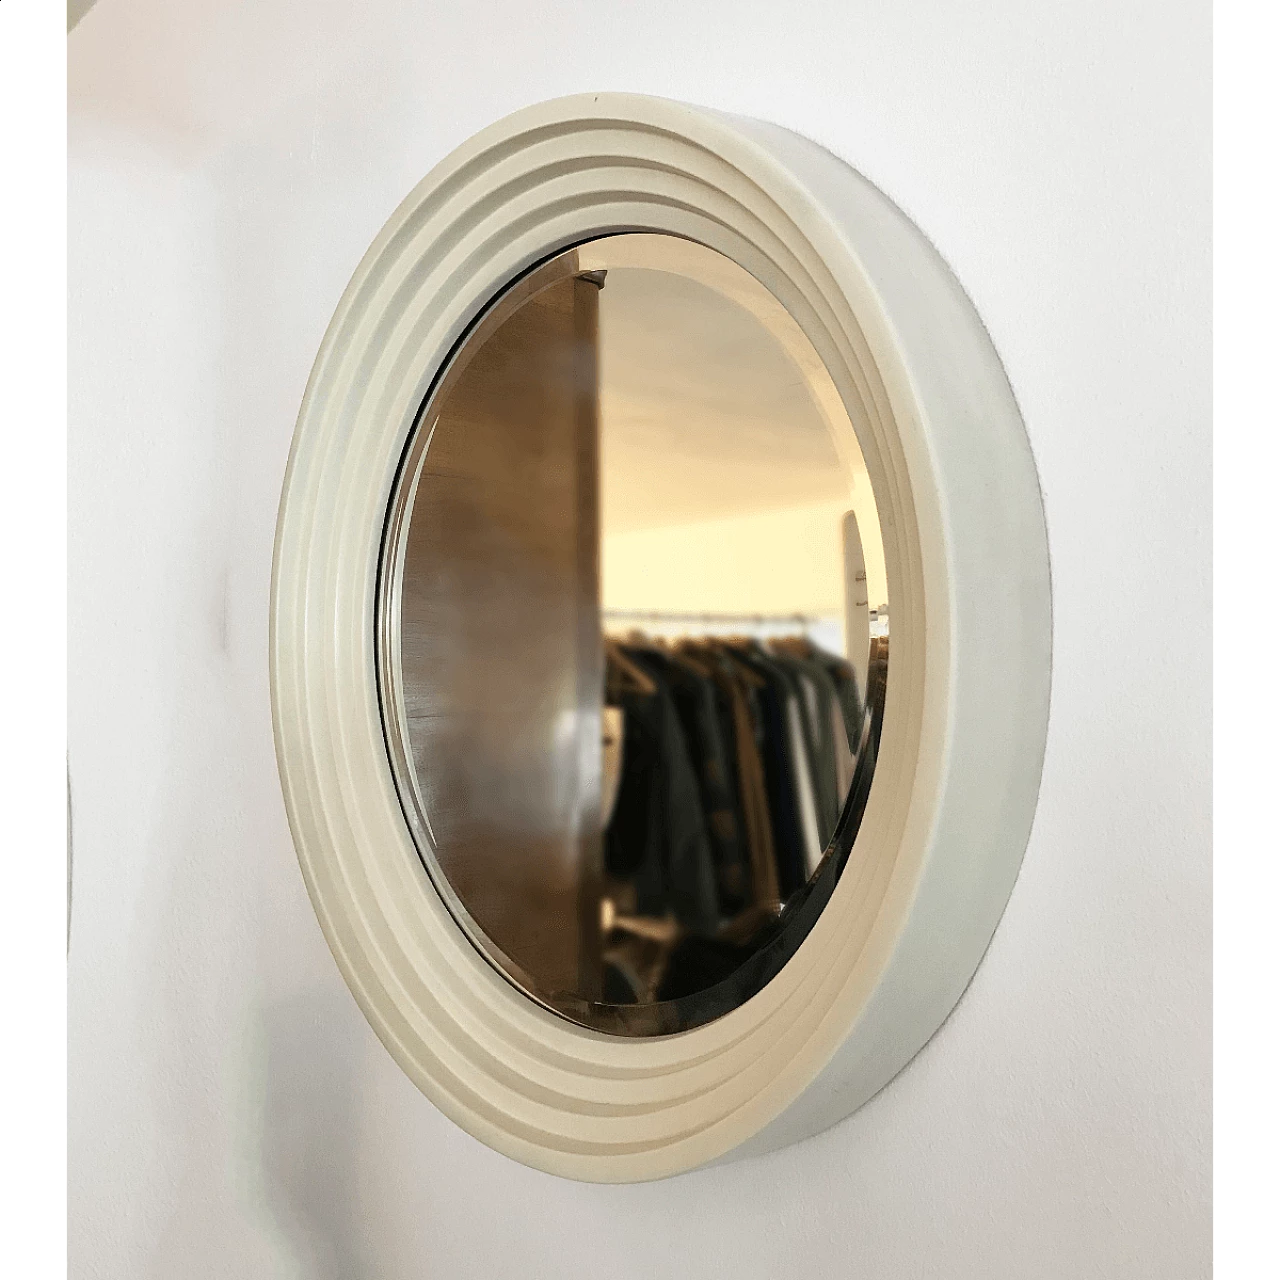 White round mirror, Memphis inspired style from the 70's 1060336